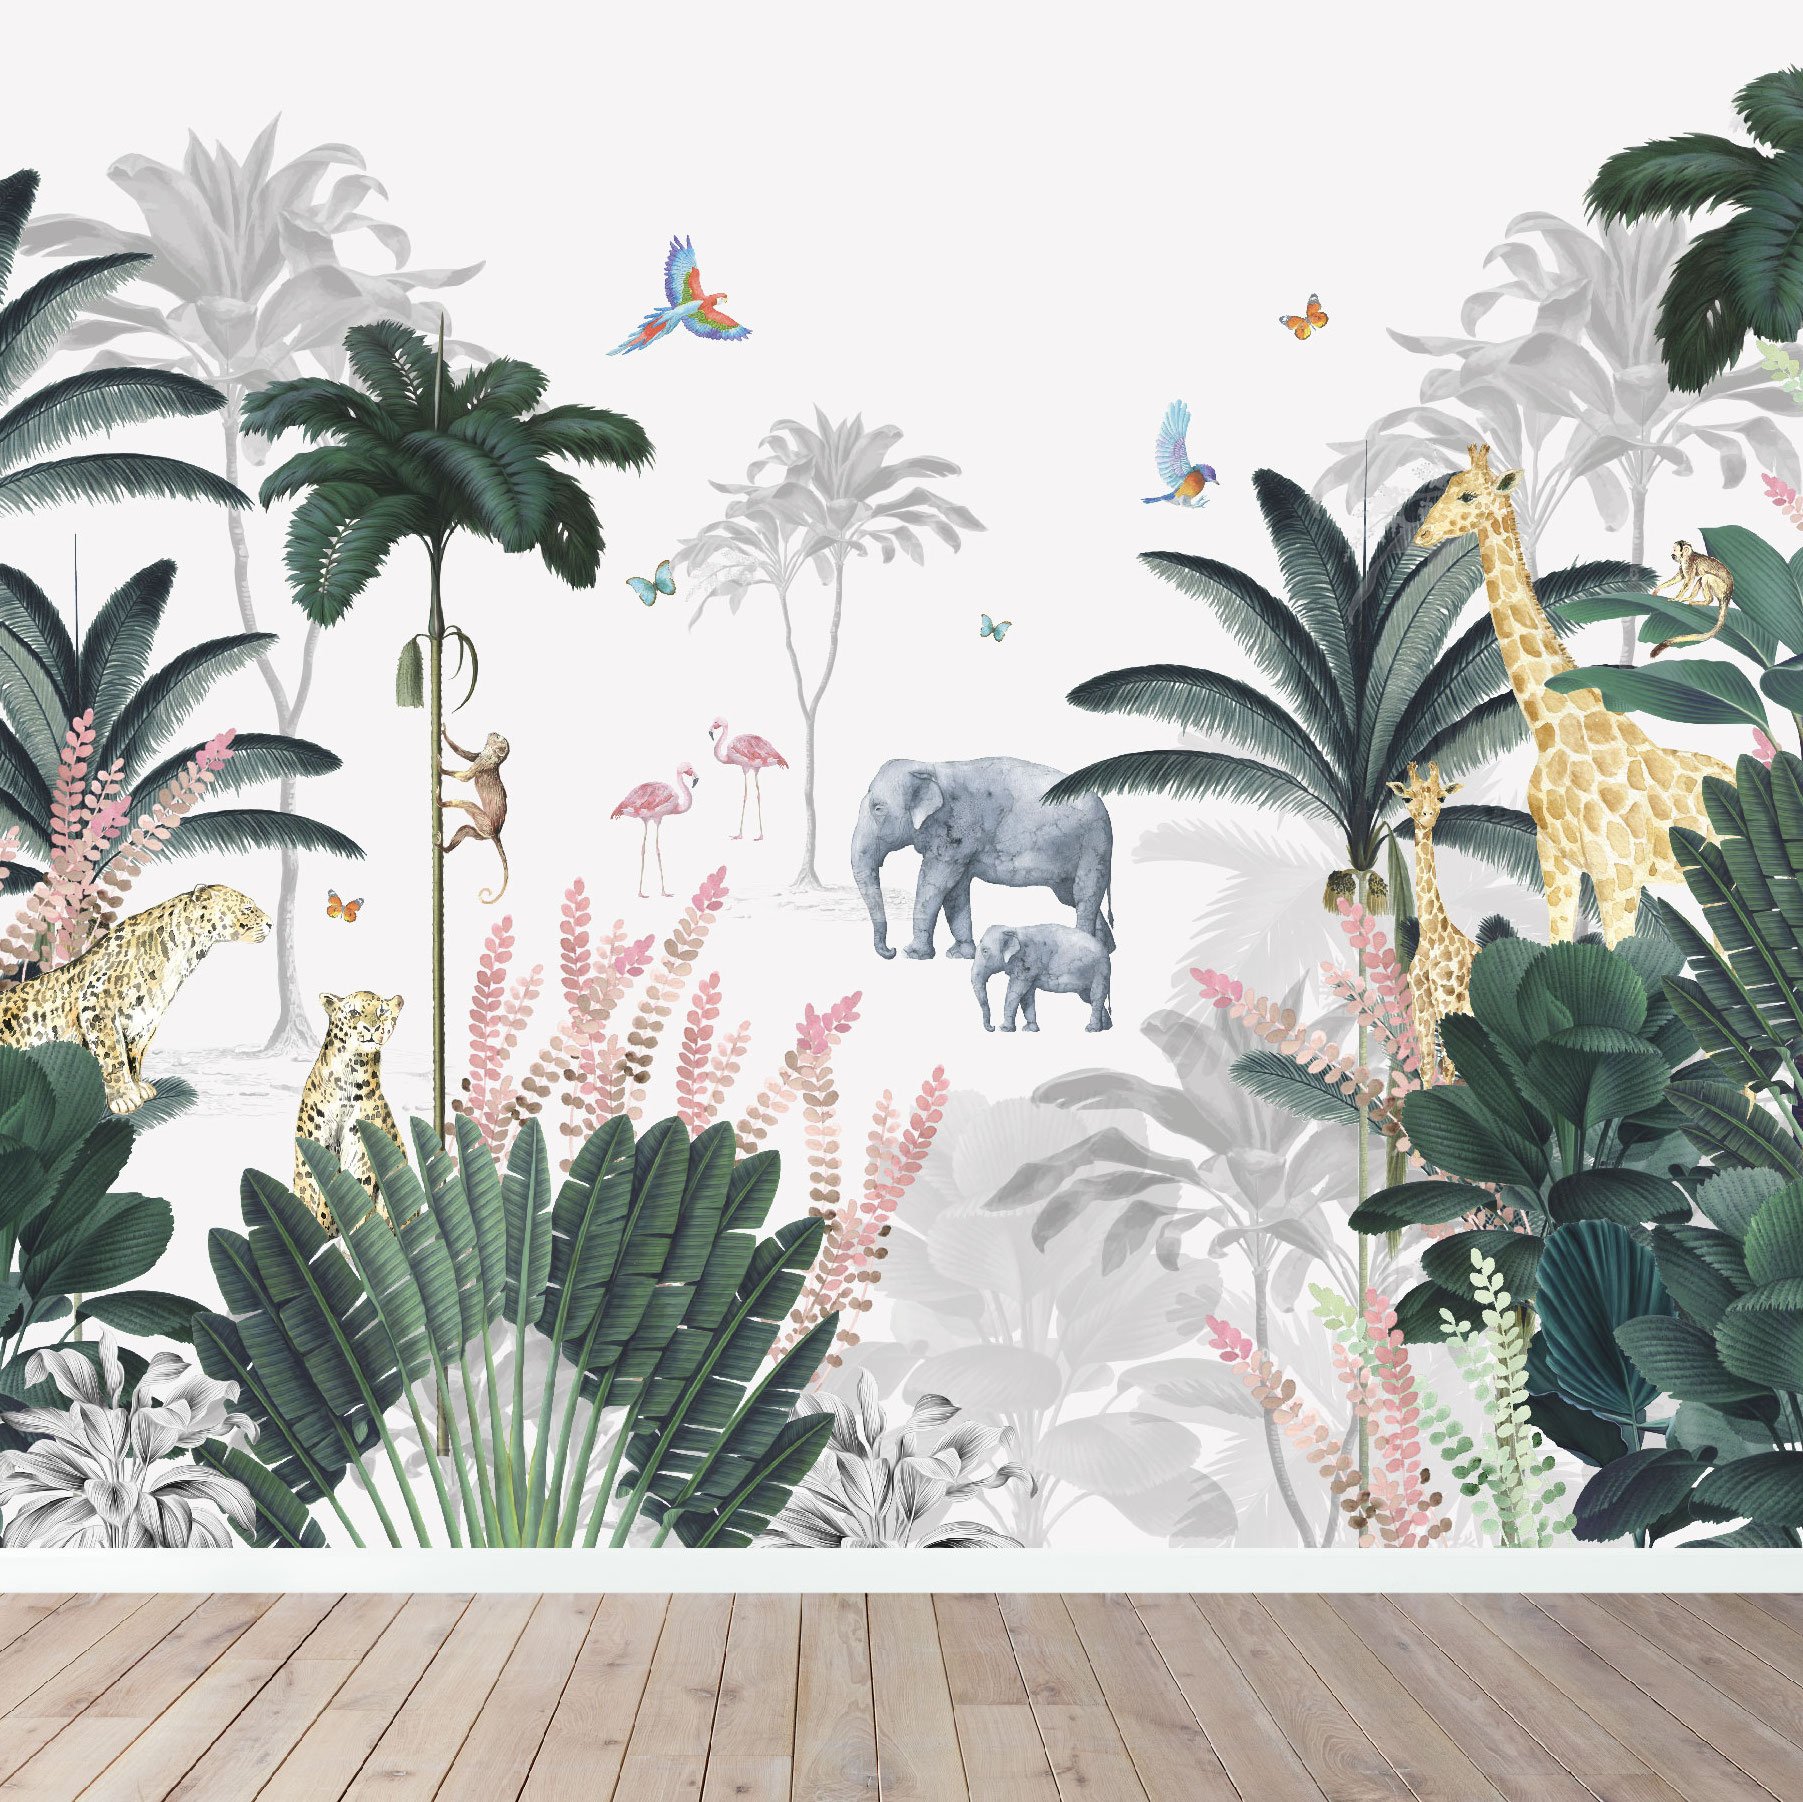 Leopard and Friends Jungle Wallpaper Mural Munks and Me